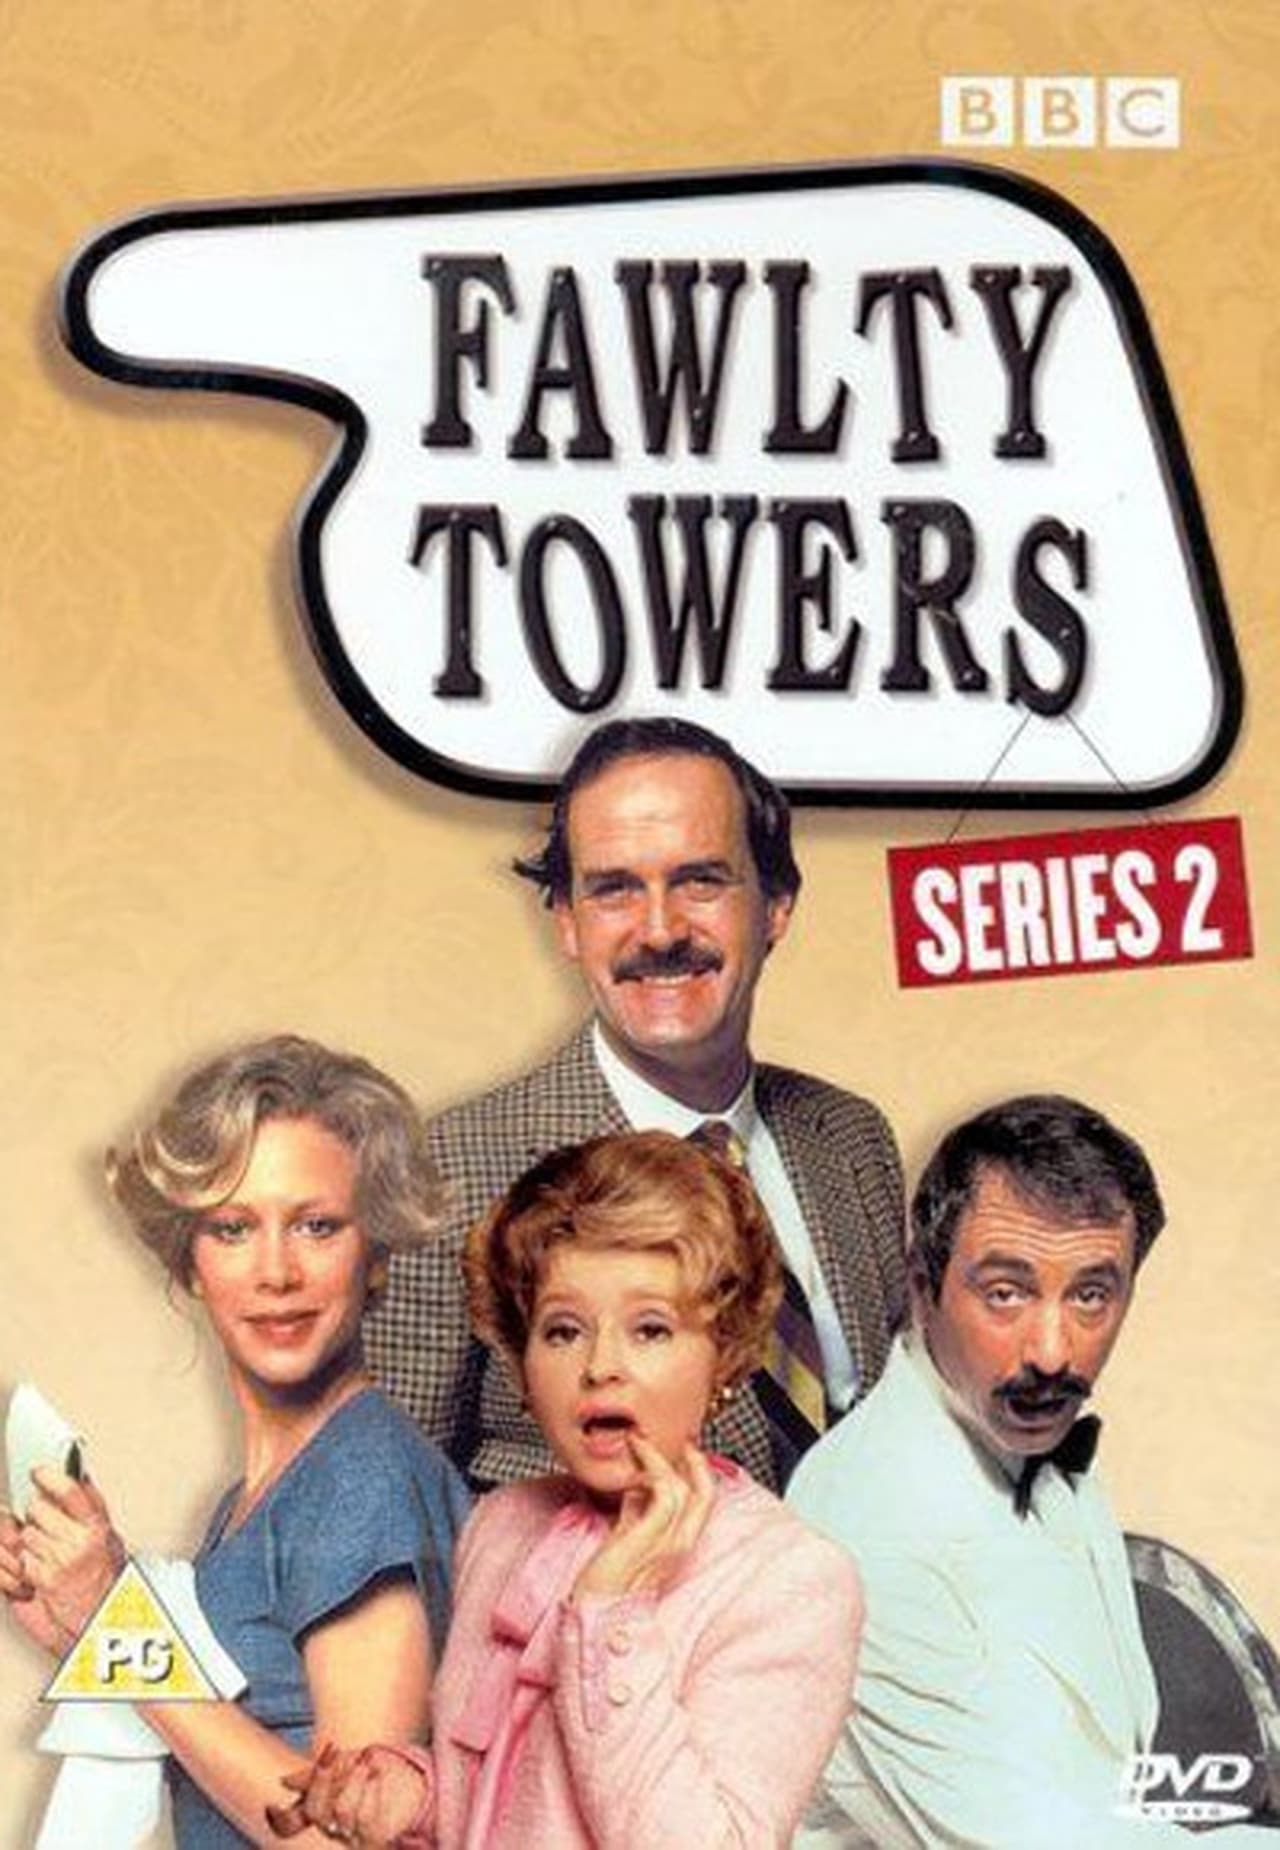 Fawlty Towers (1979)